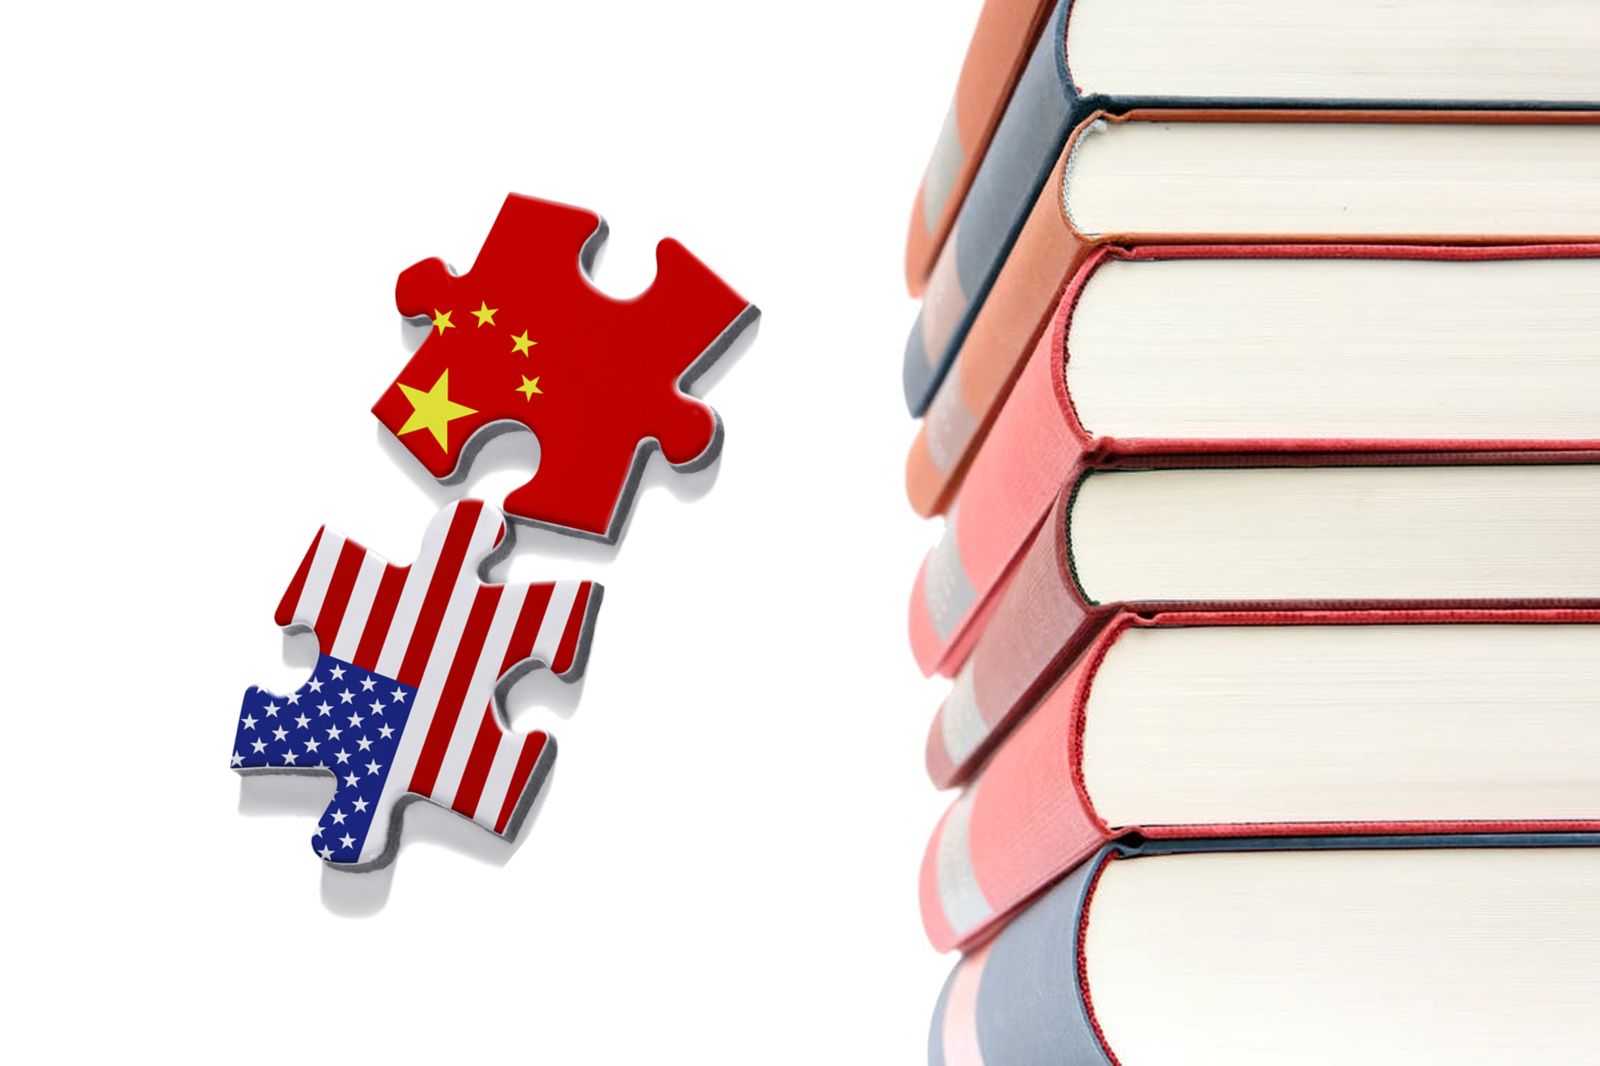 The differences between Chinese and US education